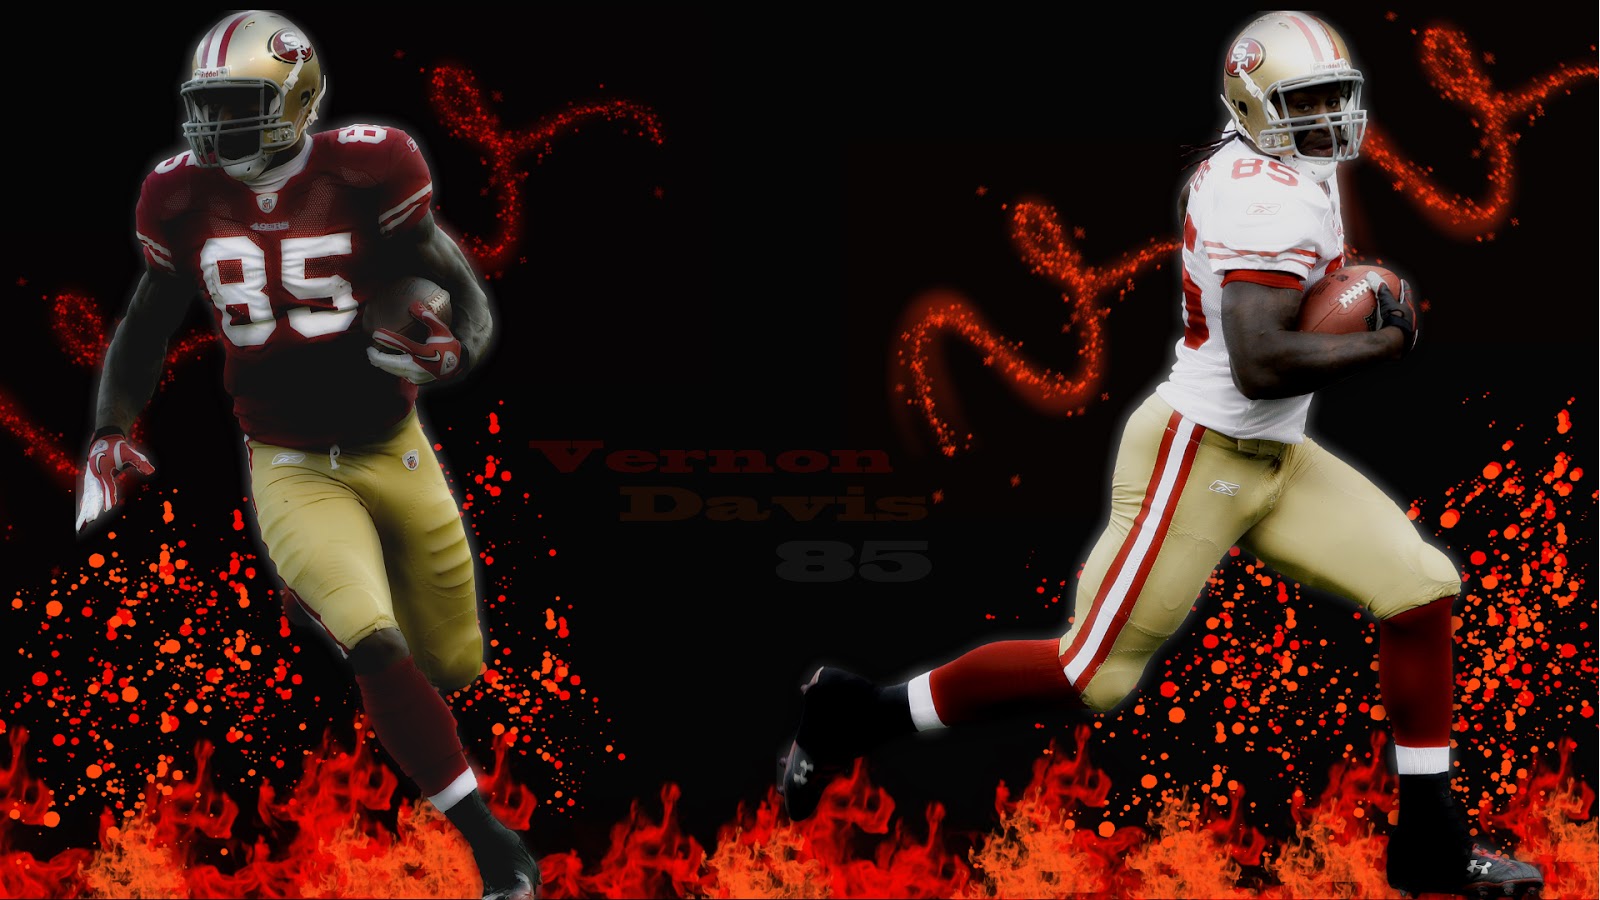 49ers Wallpaper Your Phone